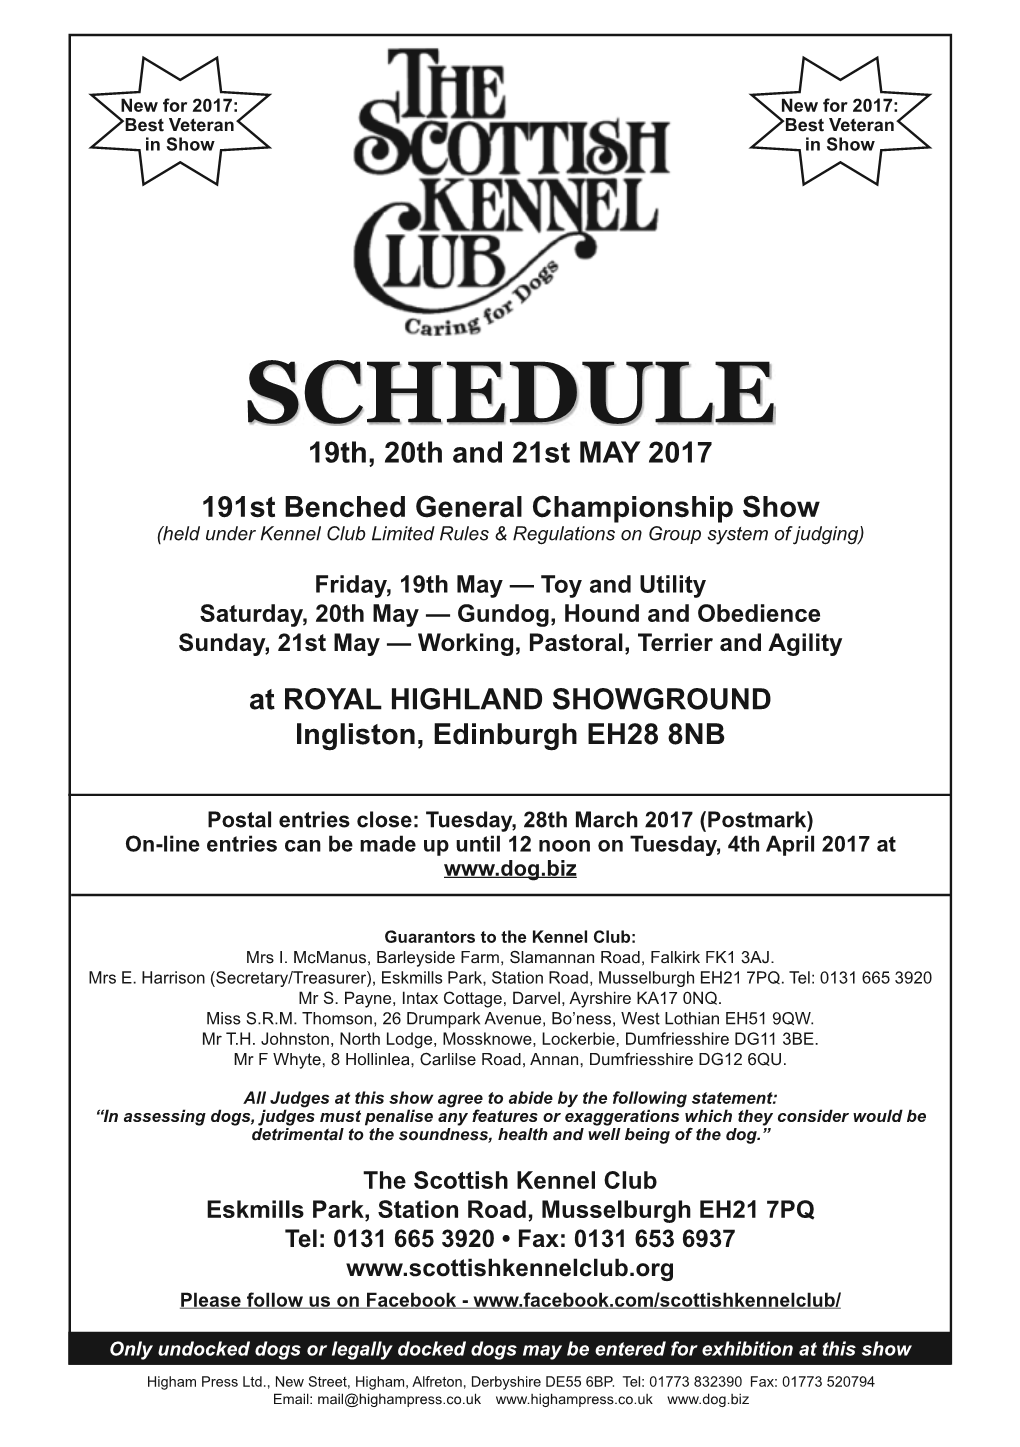 SCHEDULE 19Th, 20Th and 21St MAY 2017 191St Benched General Championship Show (Held Under Kennel Club Limited Rules & Regulations on Group System of Judging)